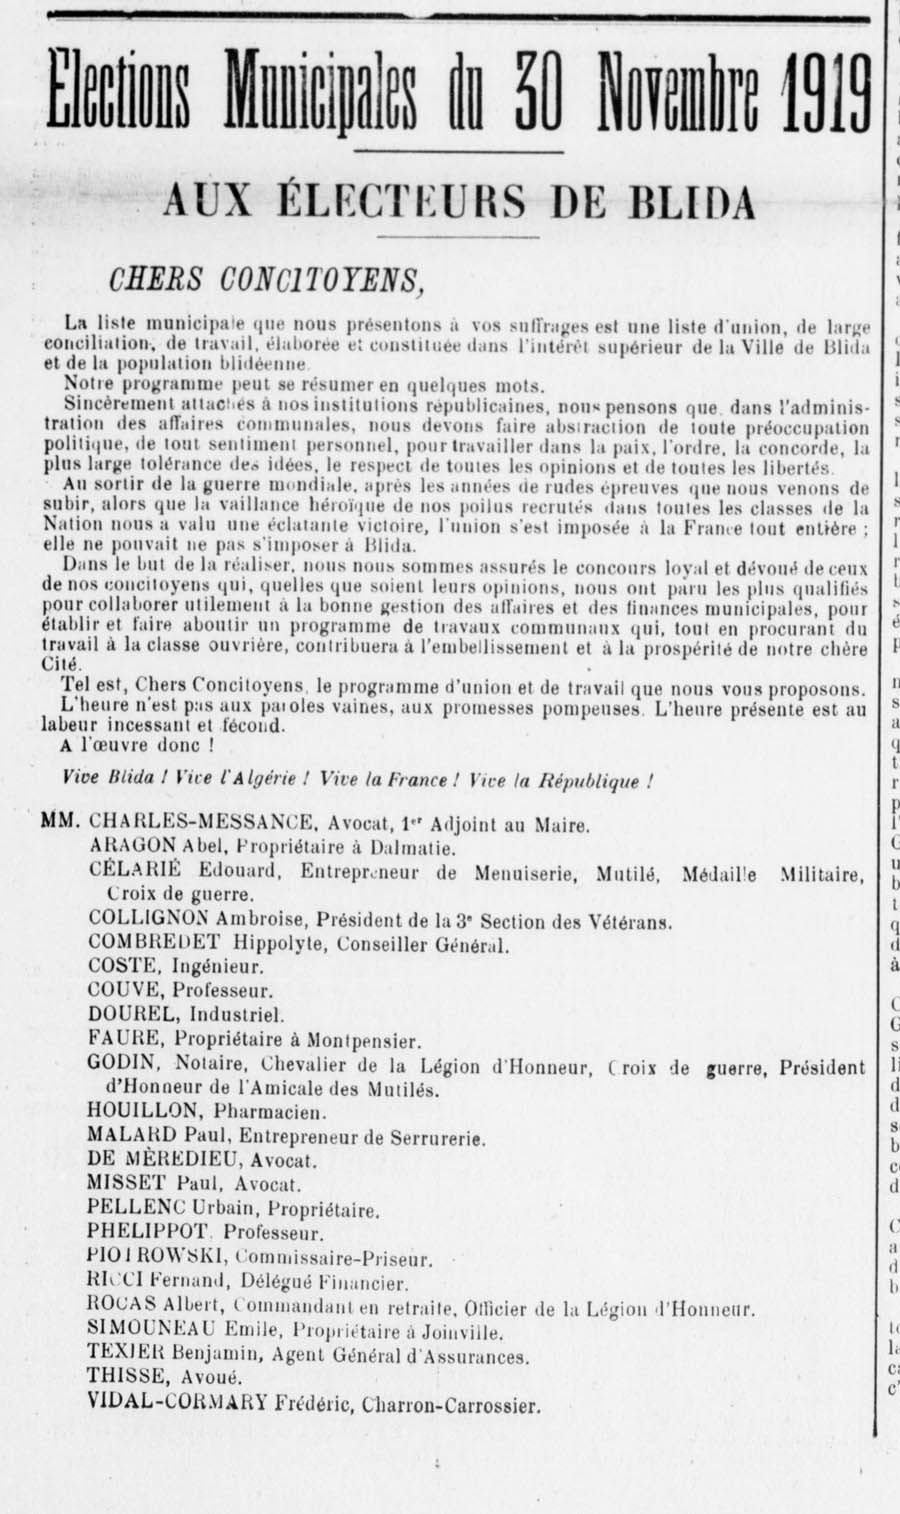 Le_Tell_1919-11-29-elections.jpg